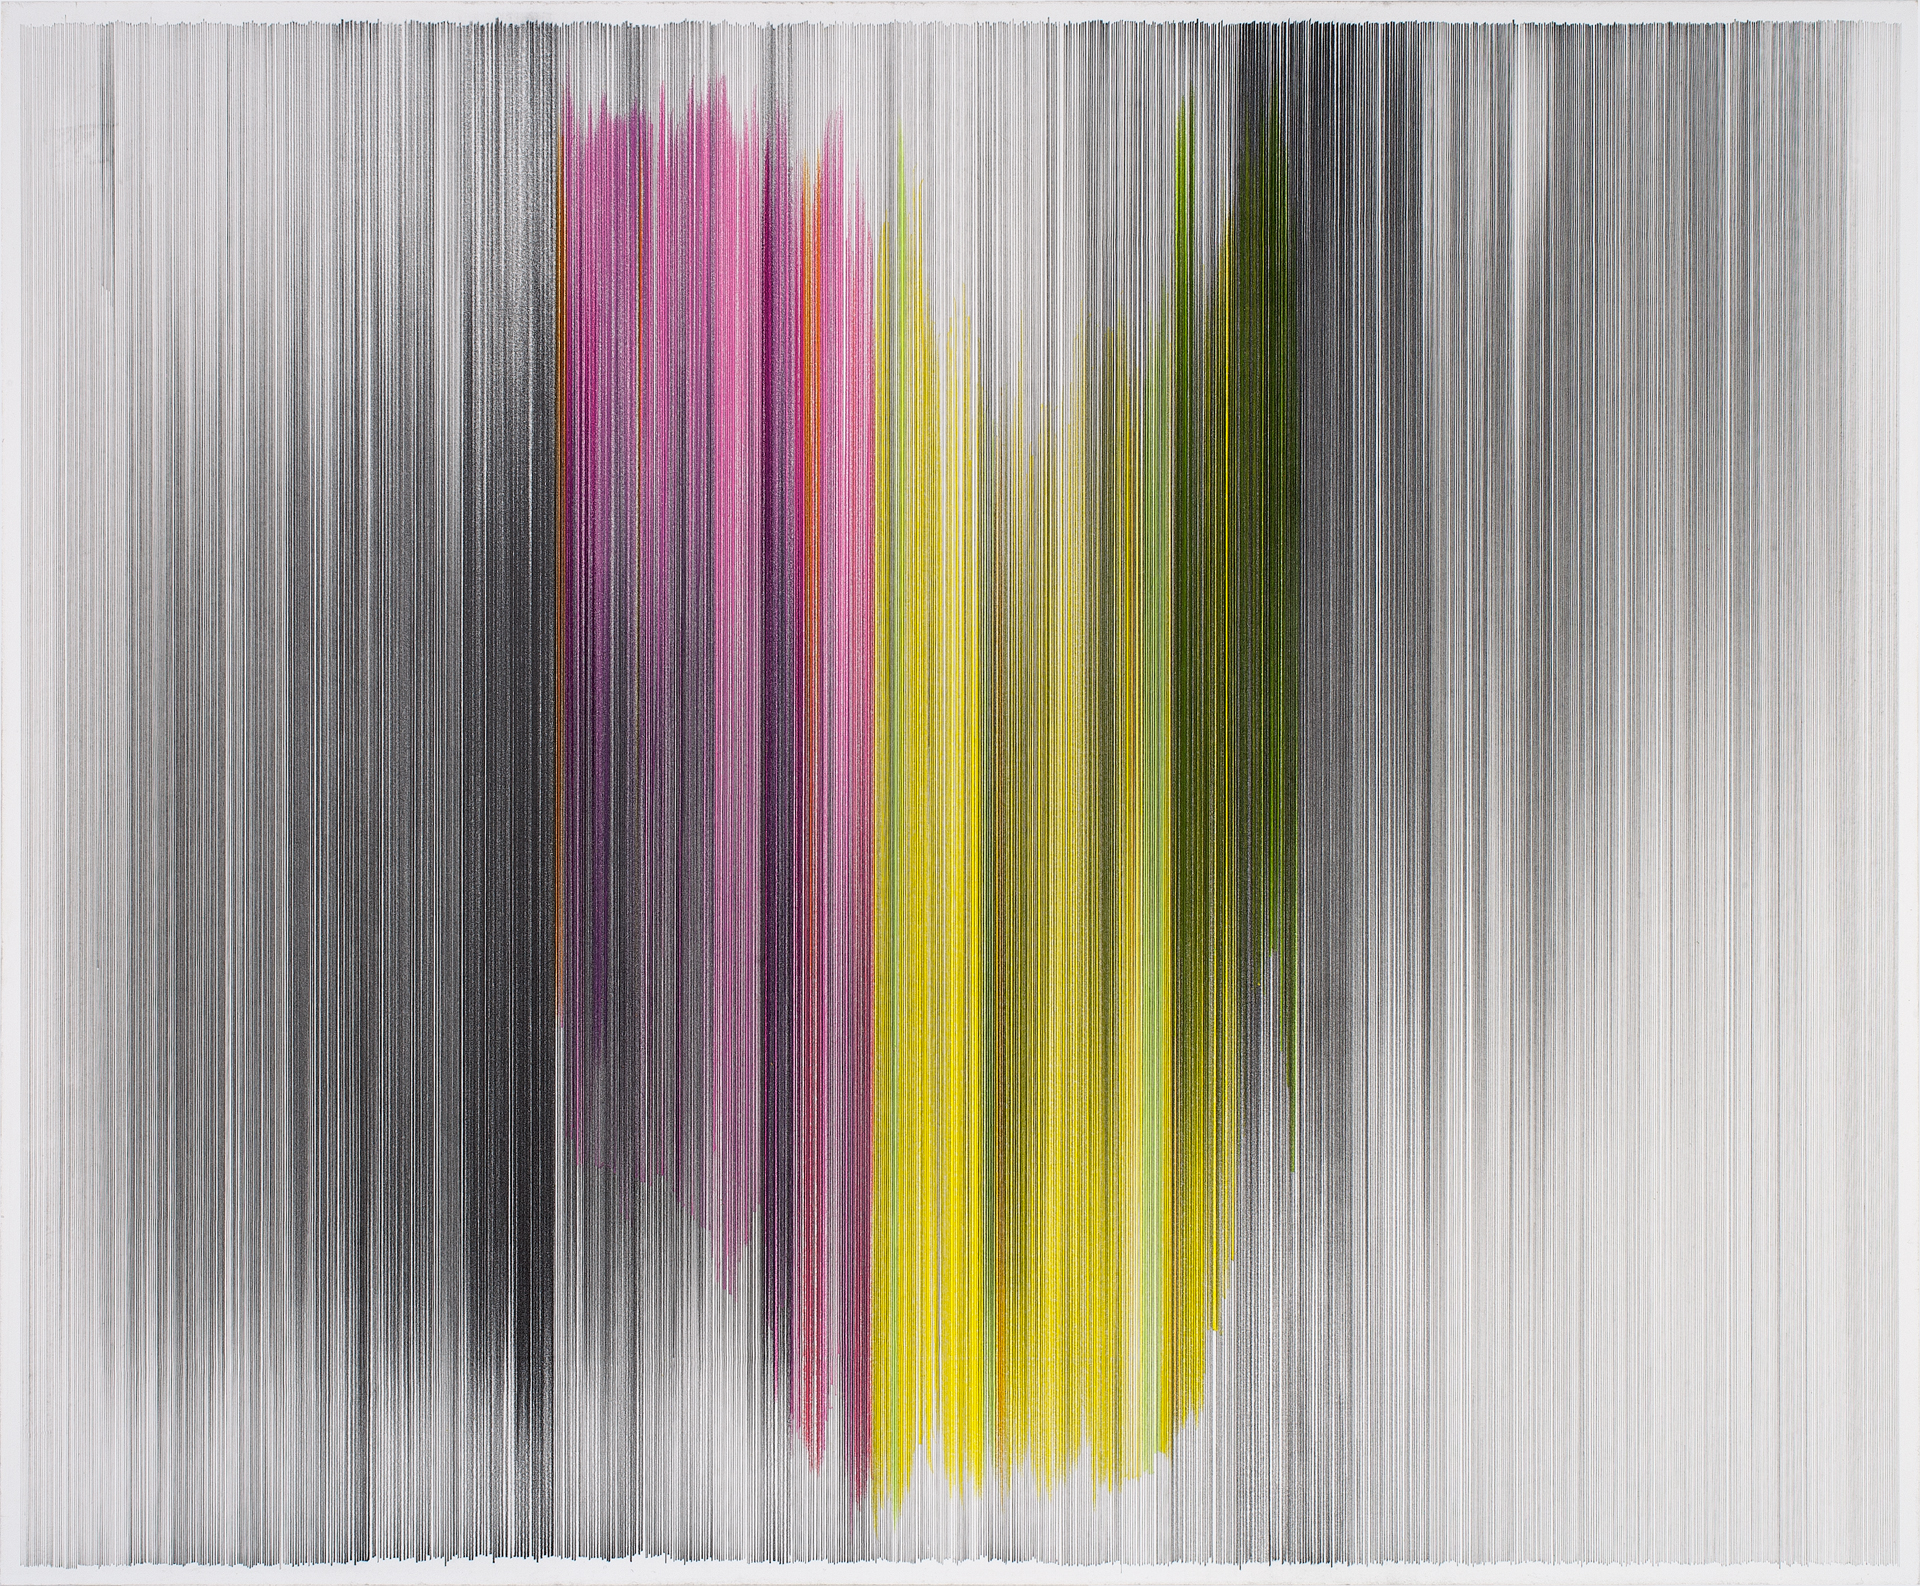    motion drawing 19   2013 graphite and colored pencil on mat board 28 x 34 inches  